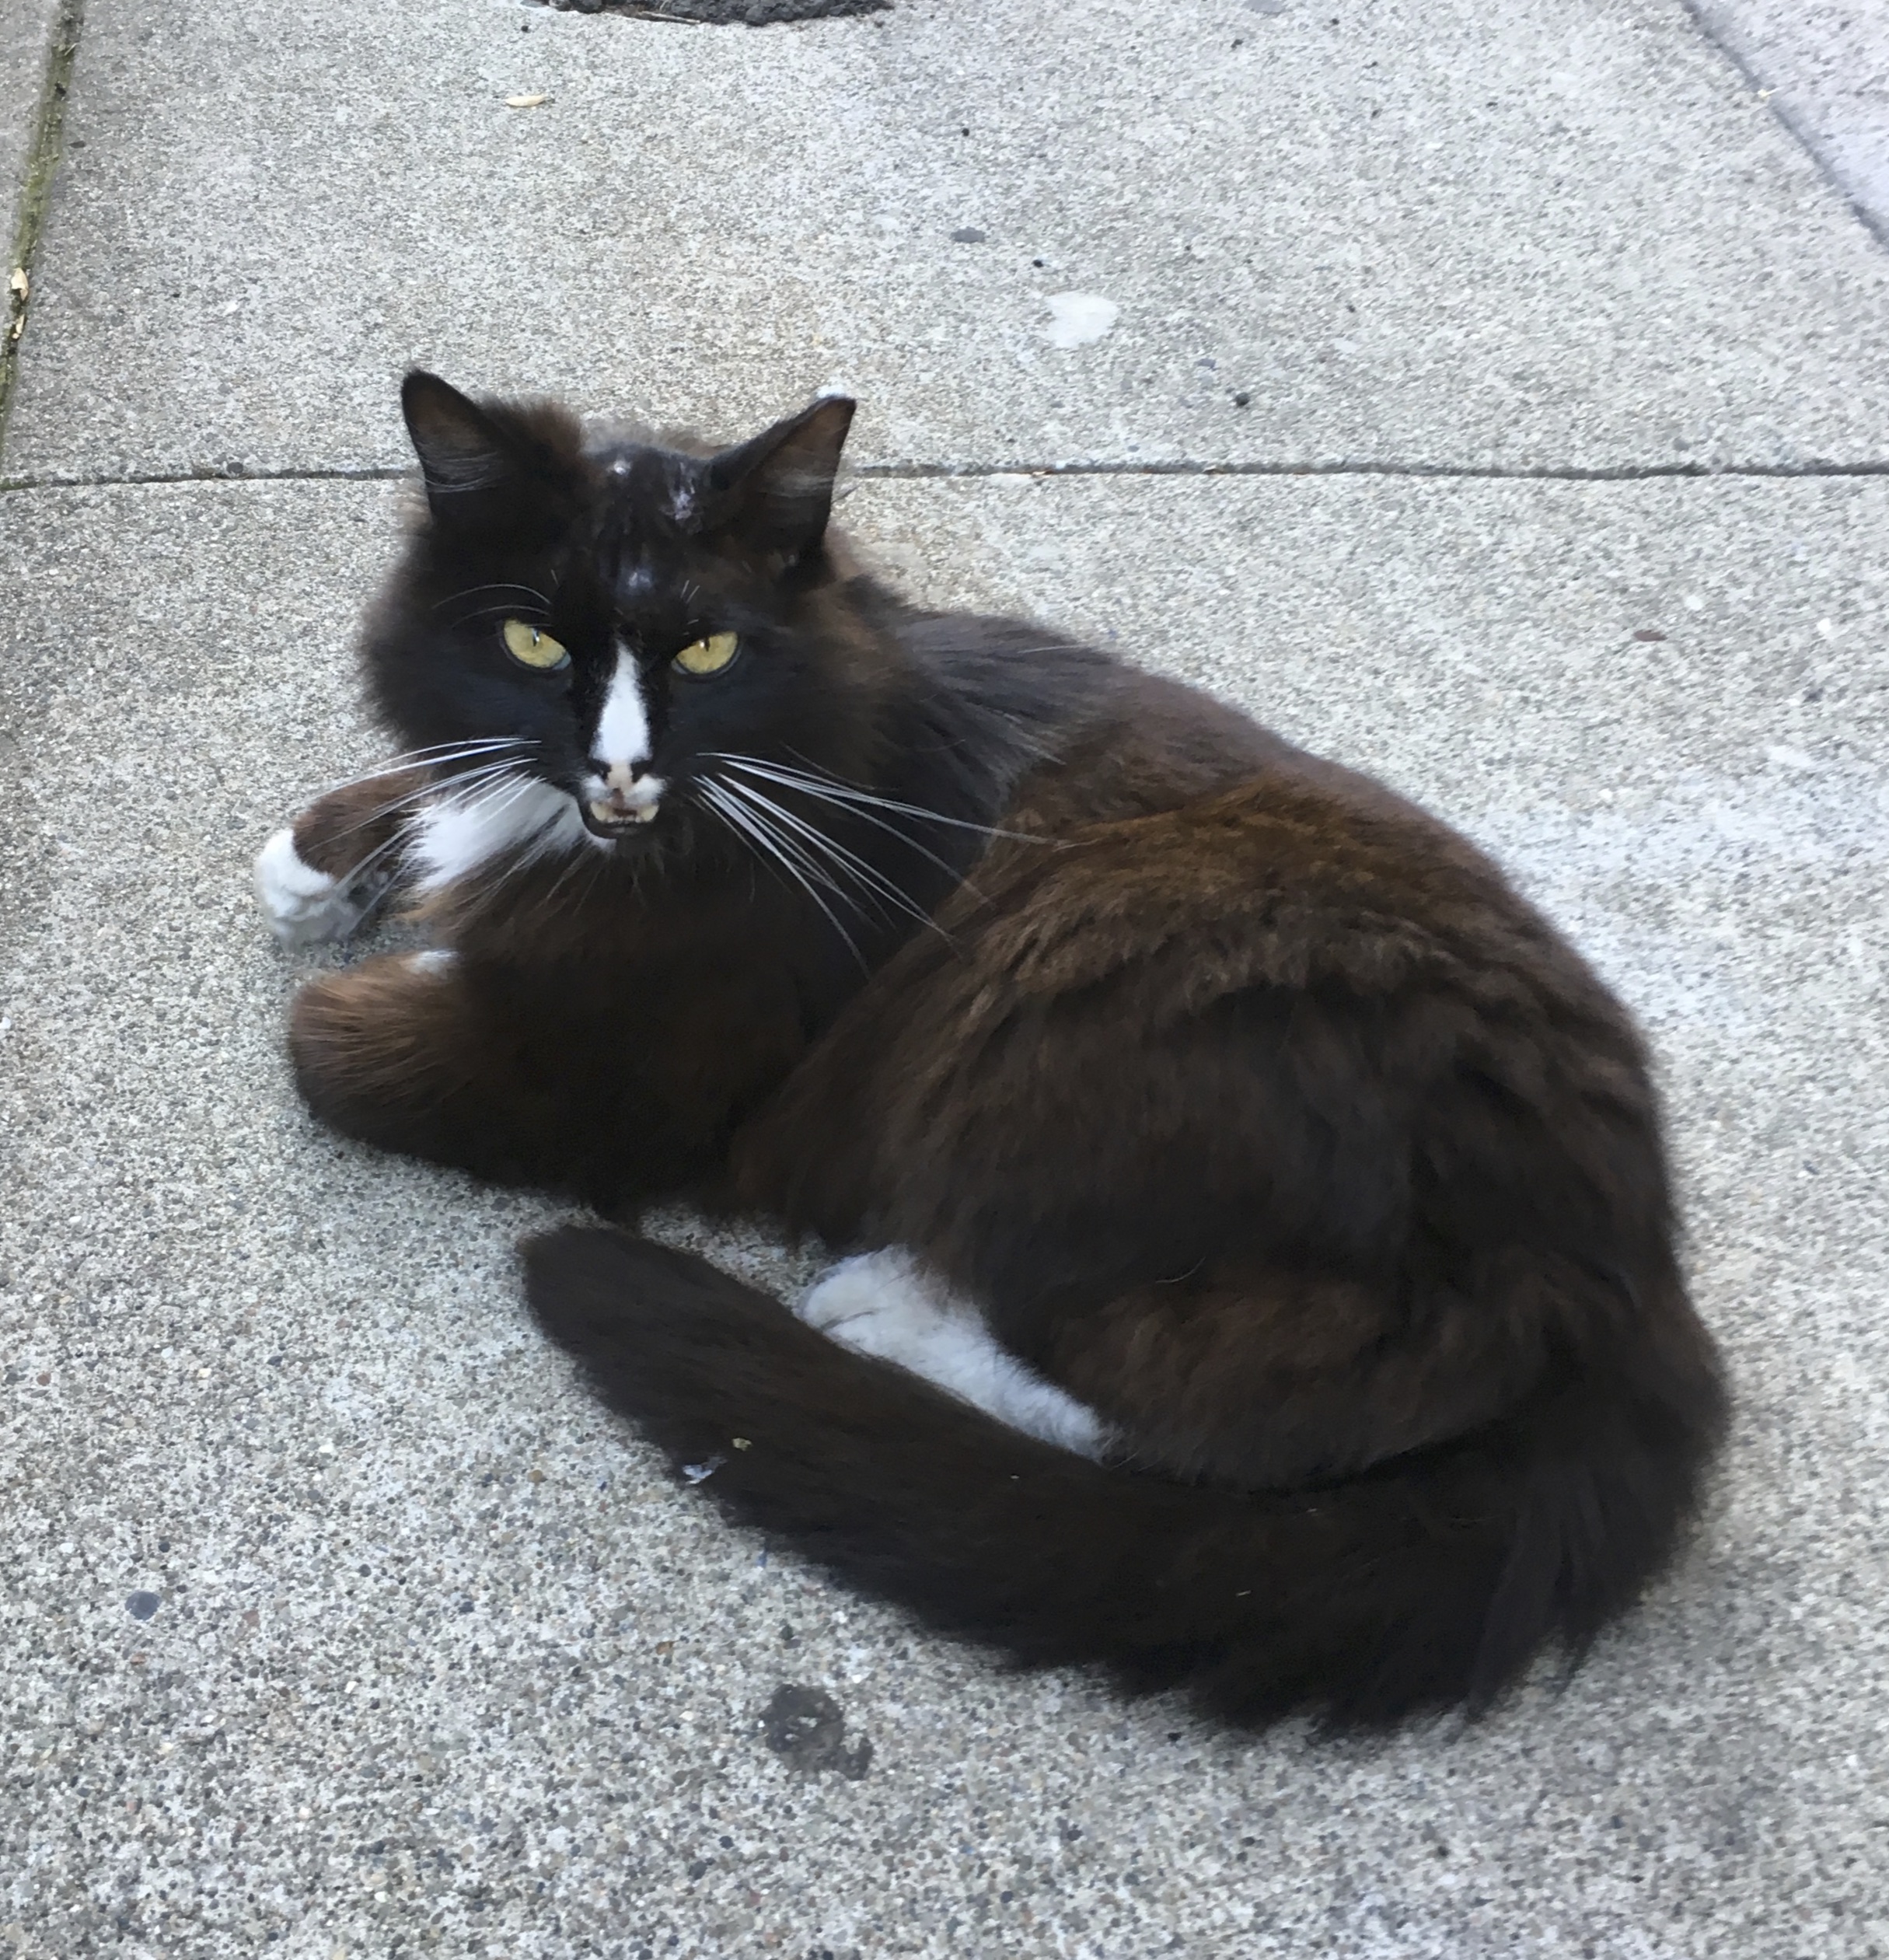 Black Cat With White Highlights On A Sidewalk